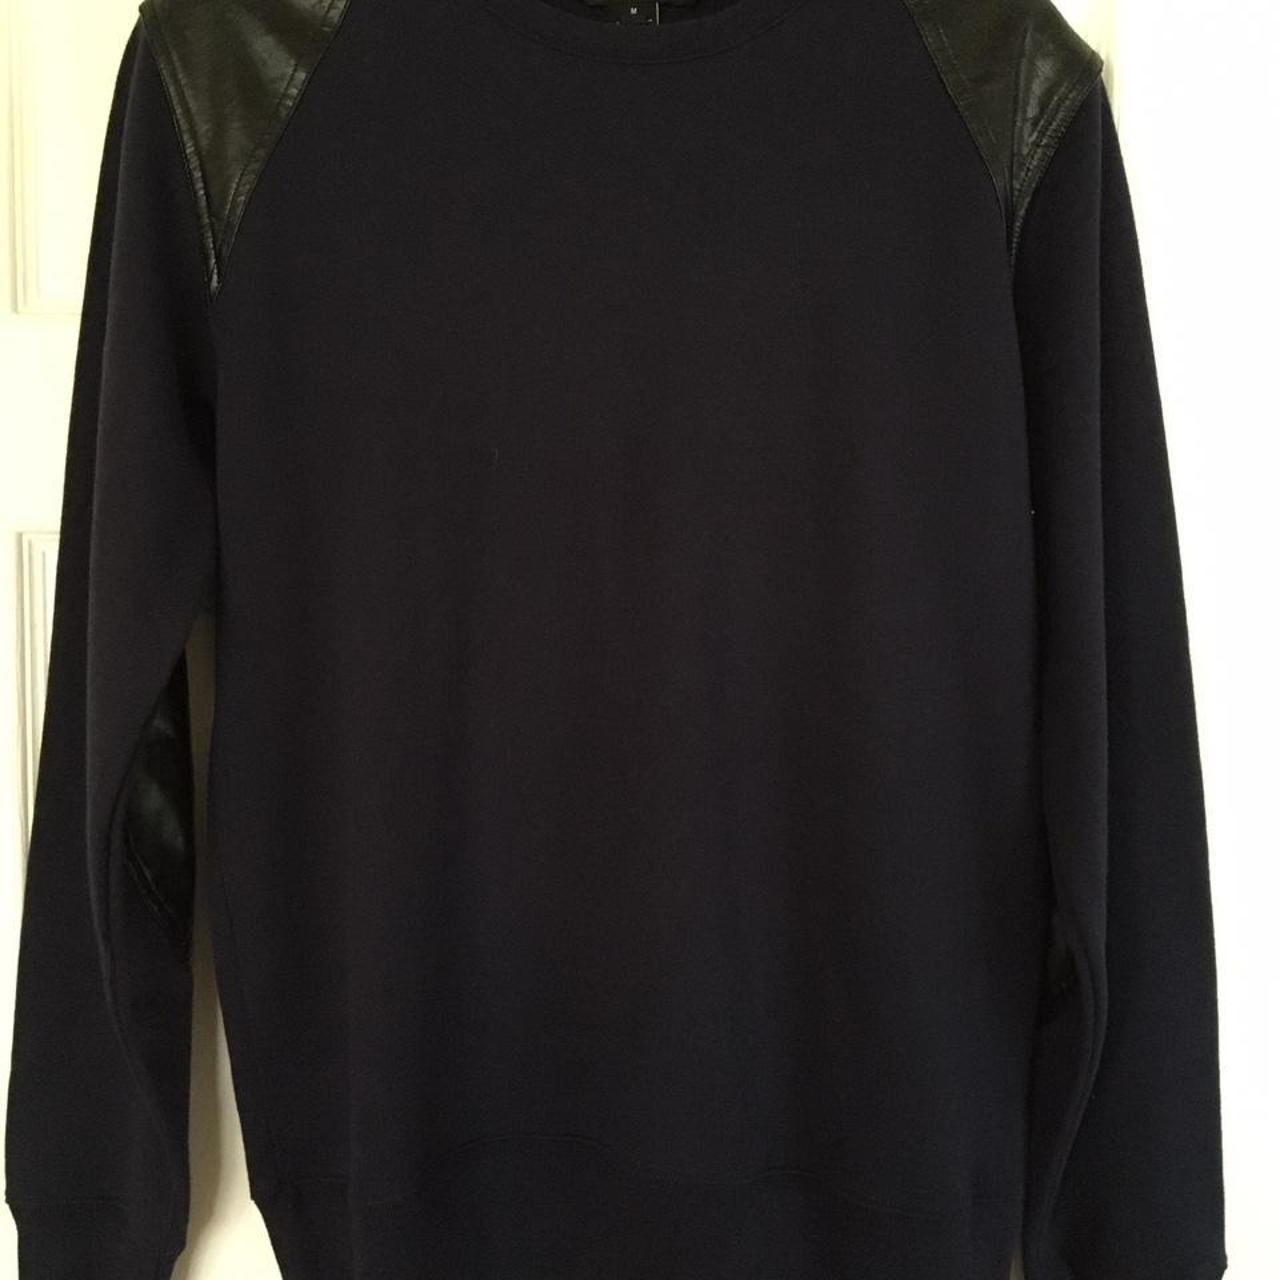 Marc by Marc Jacobs Men's Navy and Black Jumper